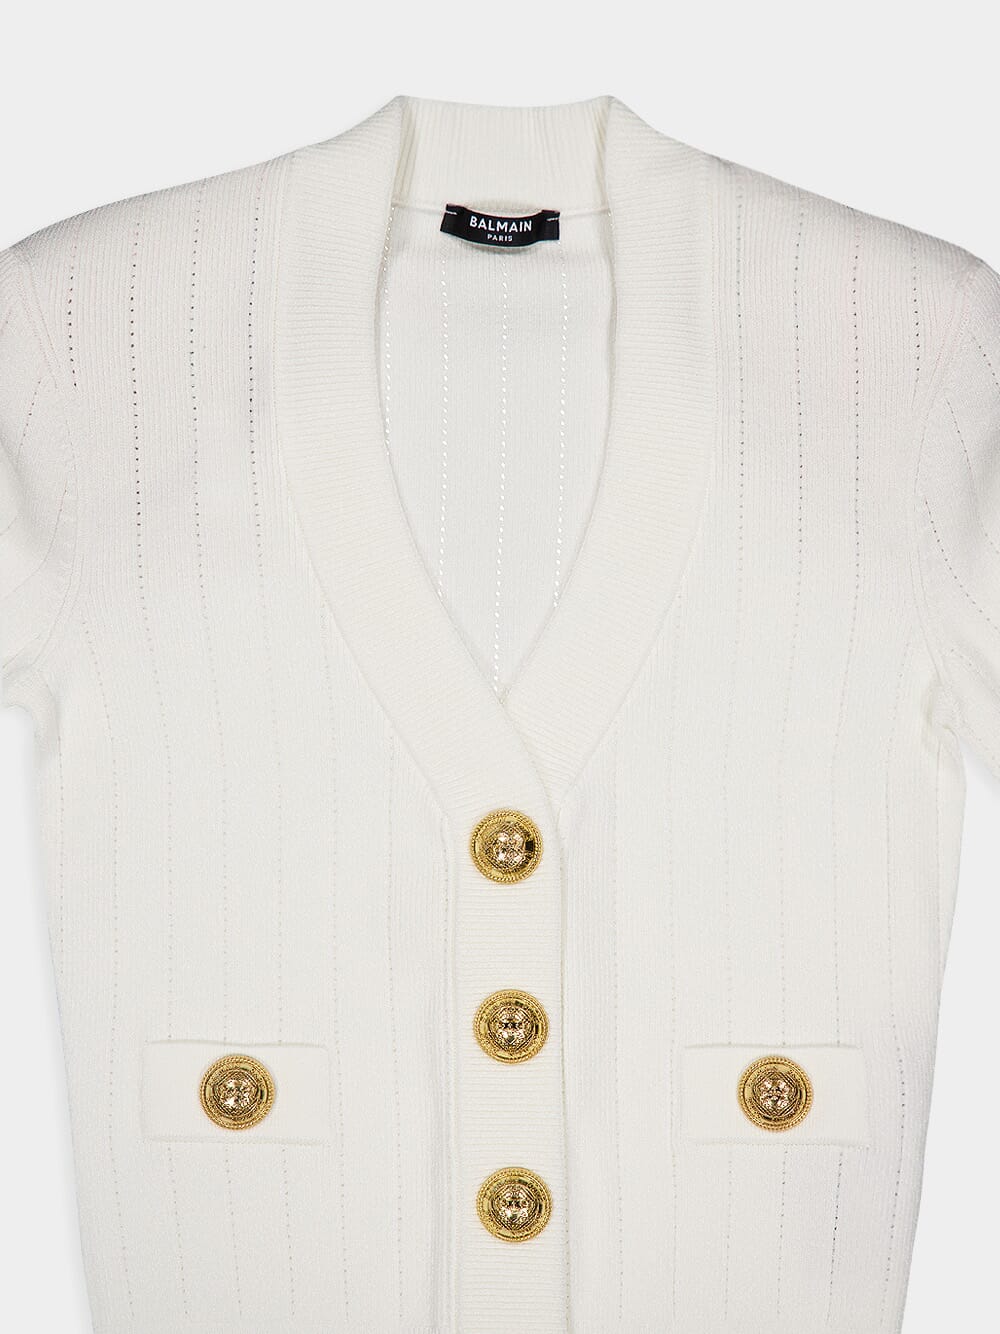 BalmainRibbed Knit Buttoned Cardigan at Fashion Clinic